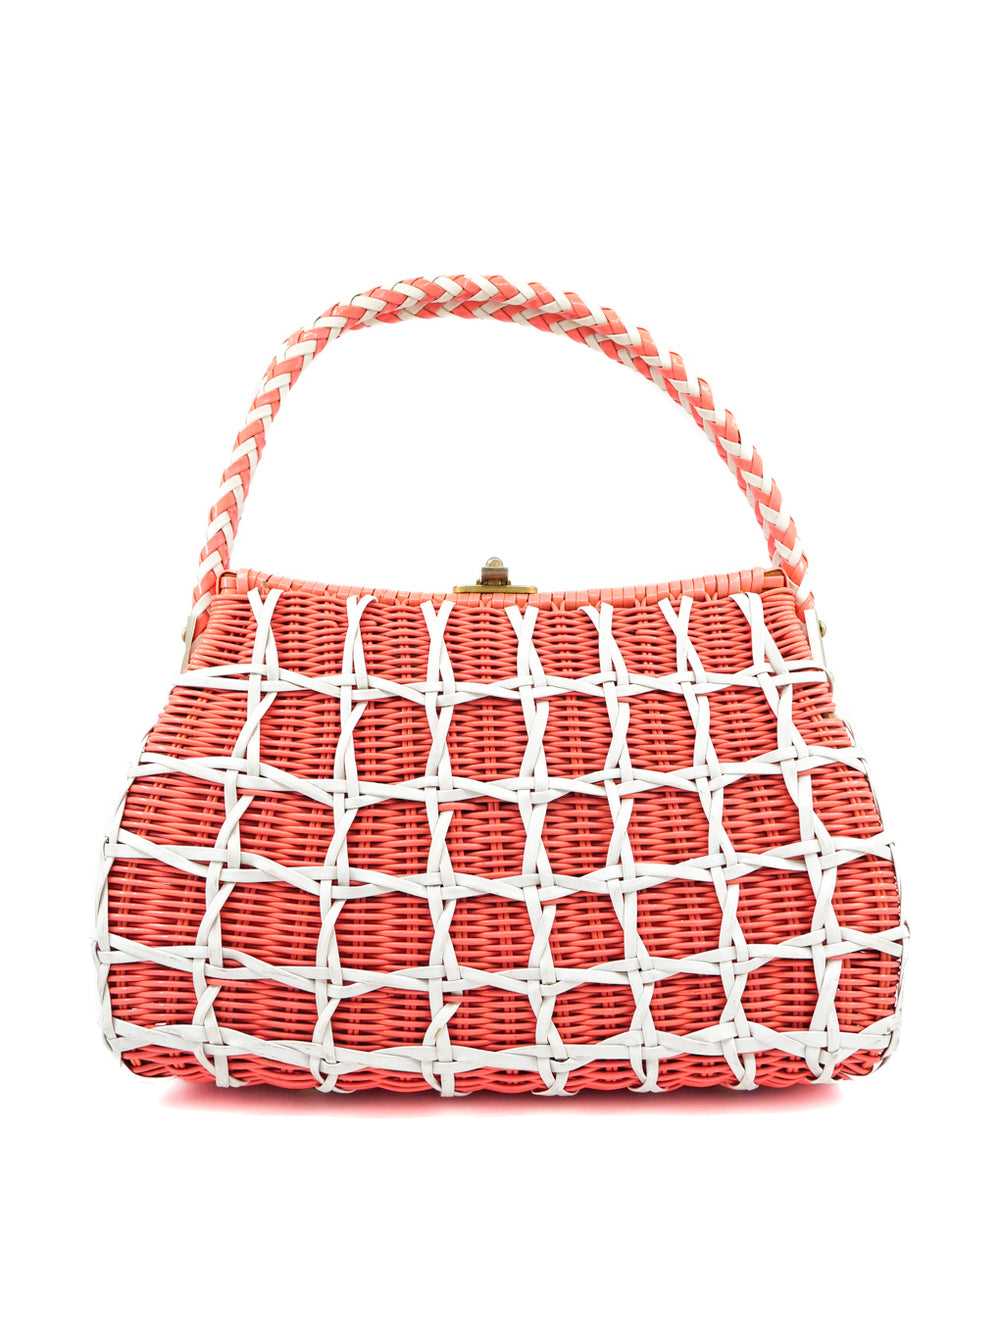 Coral Wicker Woven Basket Bag - image 1